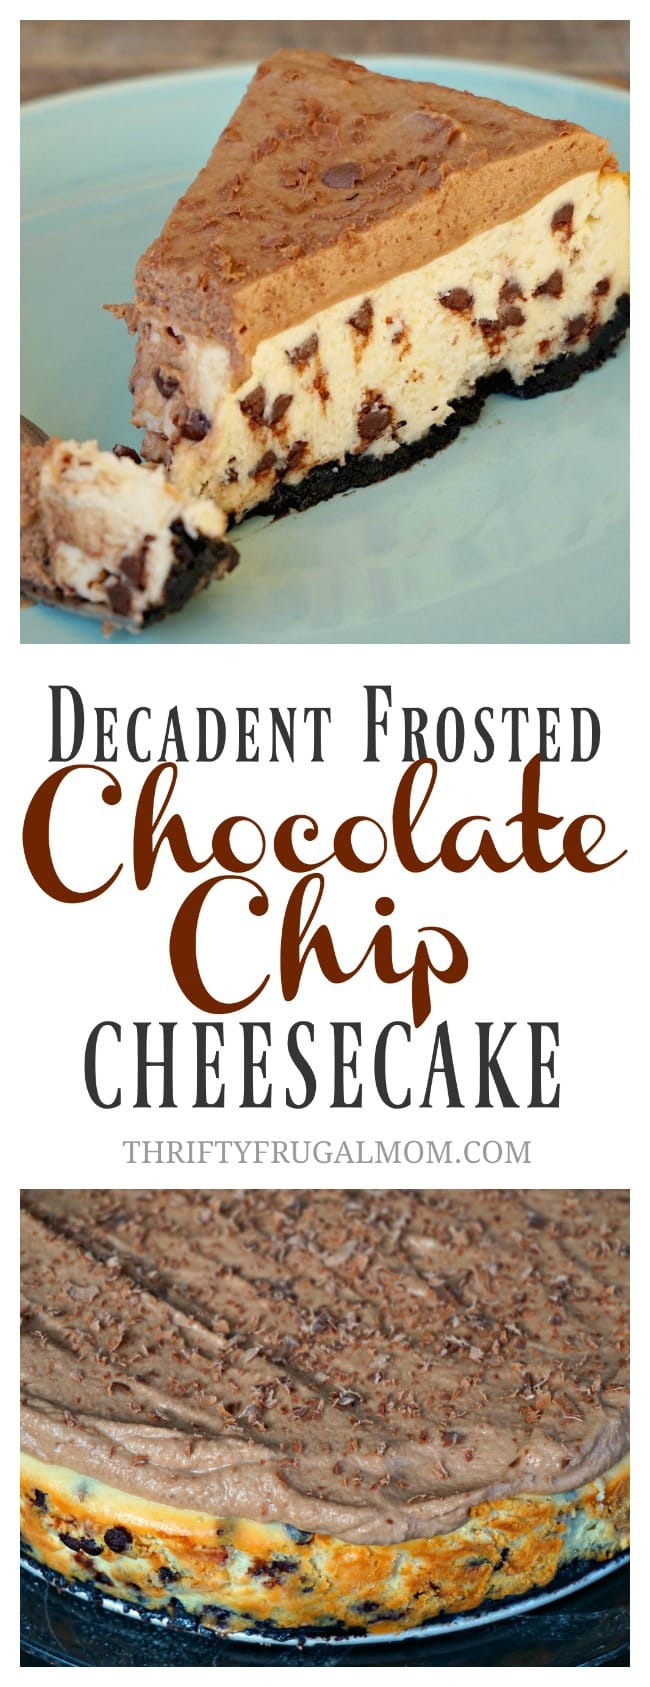 Decadent Frosted Chocolate Chip Cheesecake- the best chocolate chip dessert you'll ever make! So good!